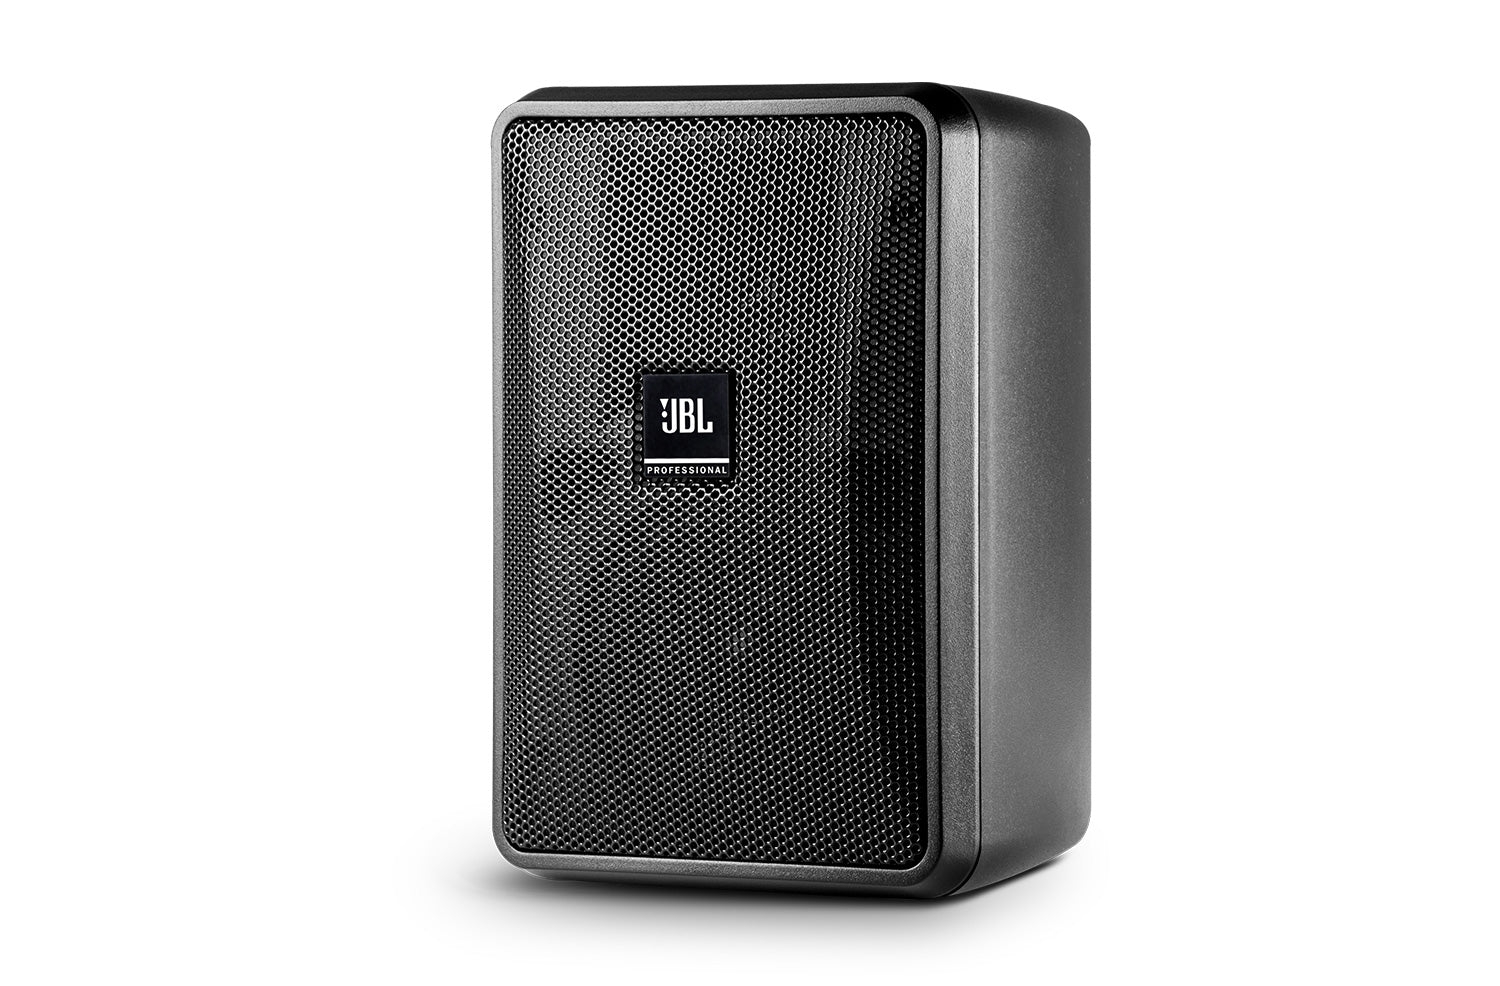 JBL Professional Ultra-Compact 8-Ohm Indoor/Outdoor Background/Foreground Speaker, White, Sold as Pair - 305broadcast